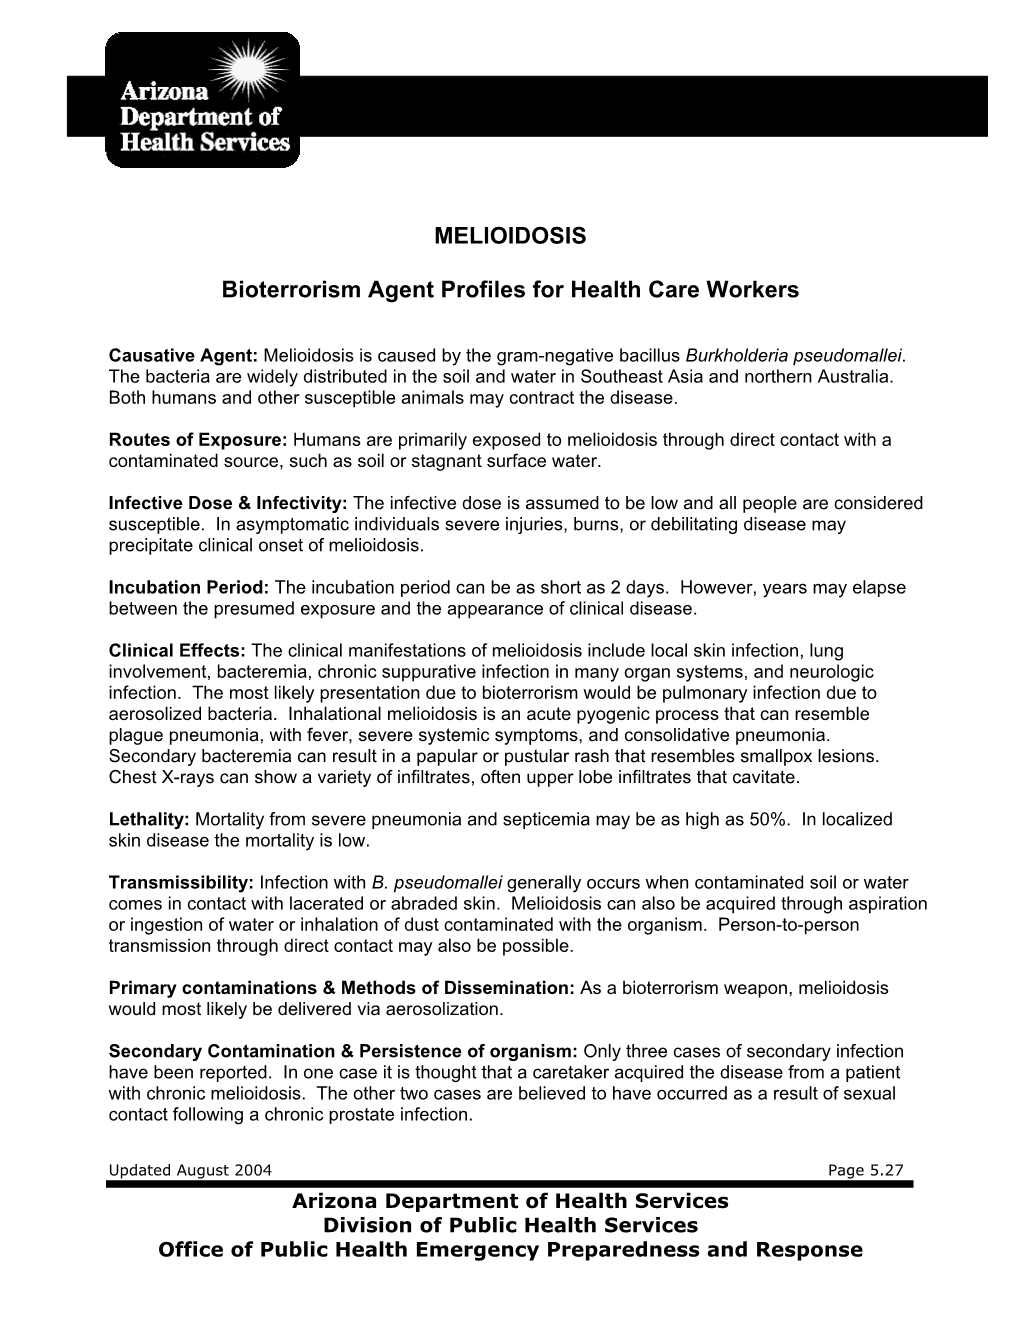 MELIOIDOSIS Bioterrorism Agent Profiles for Health Care Workers